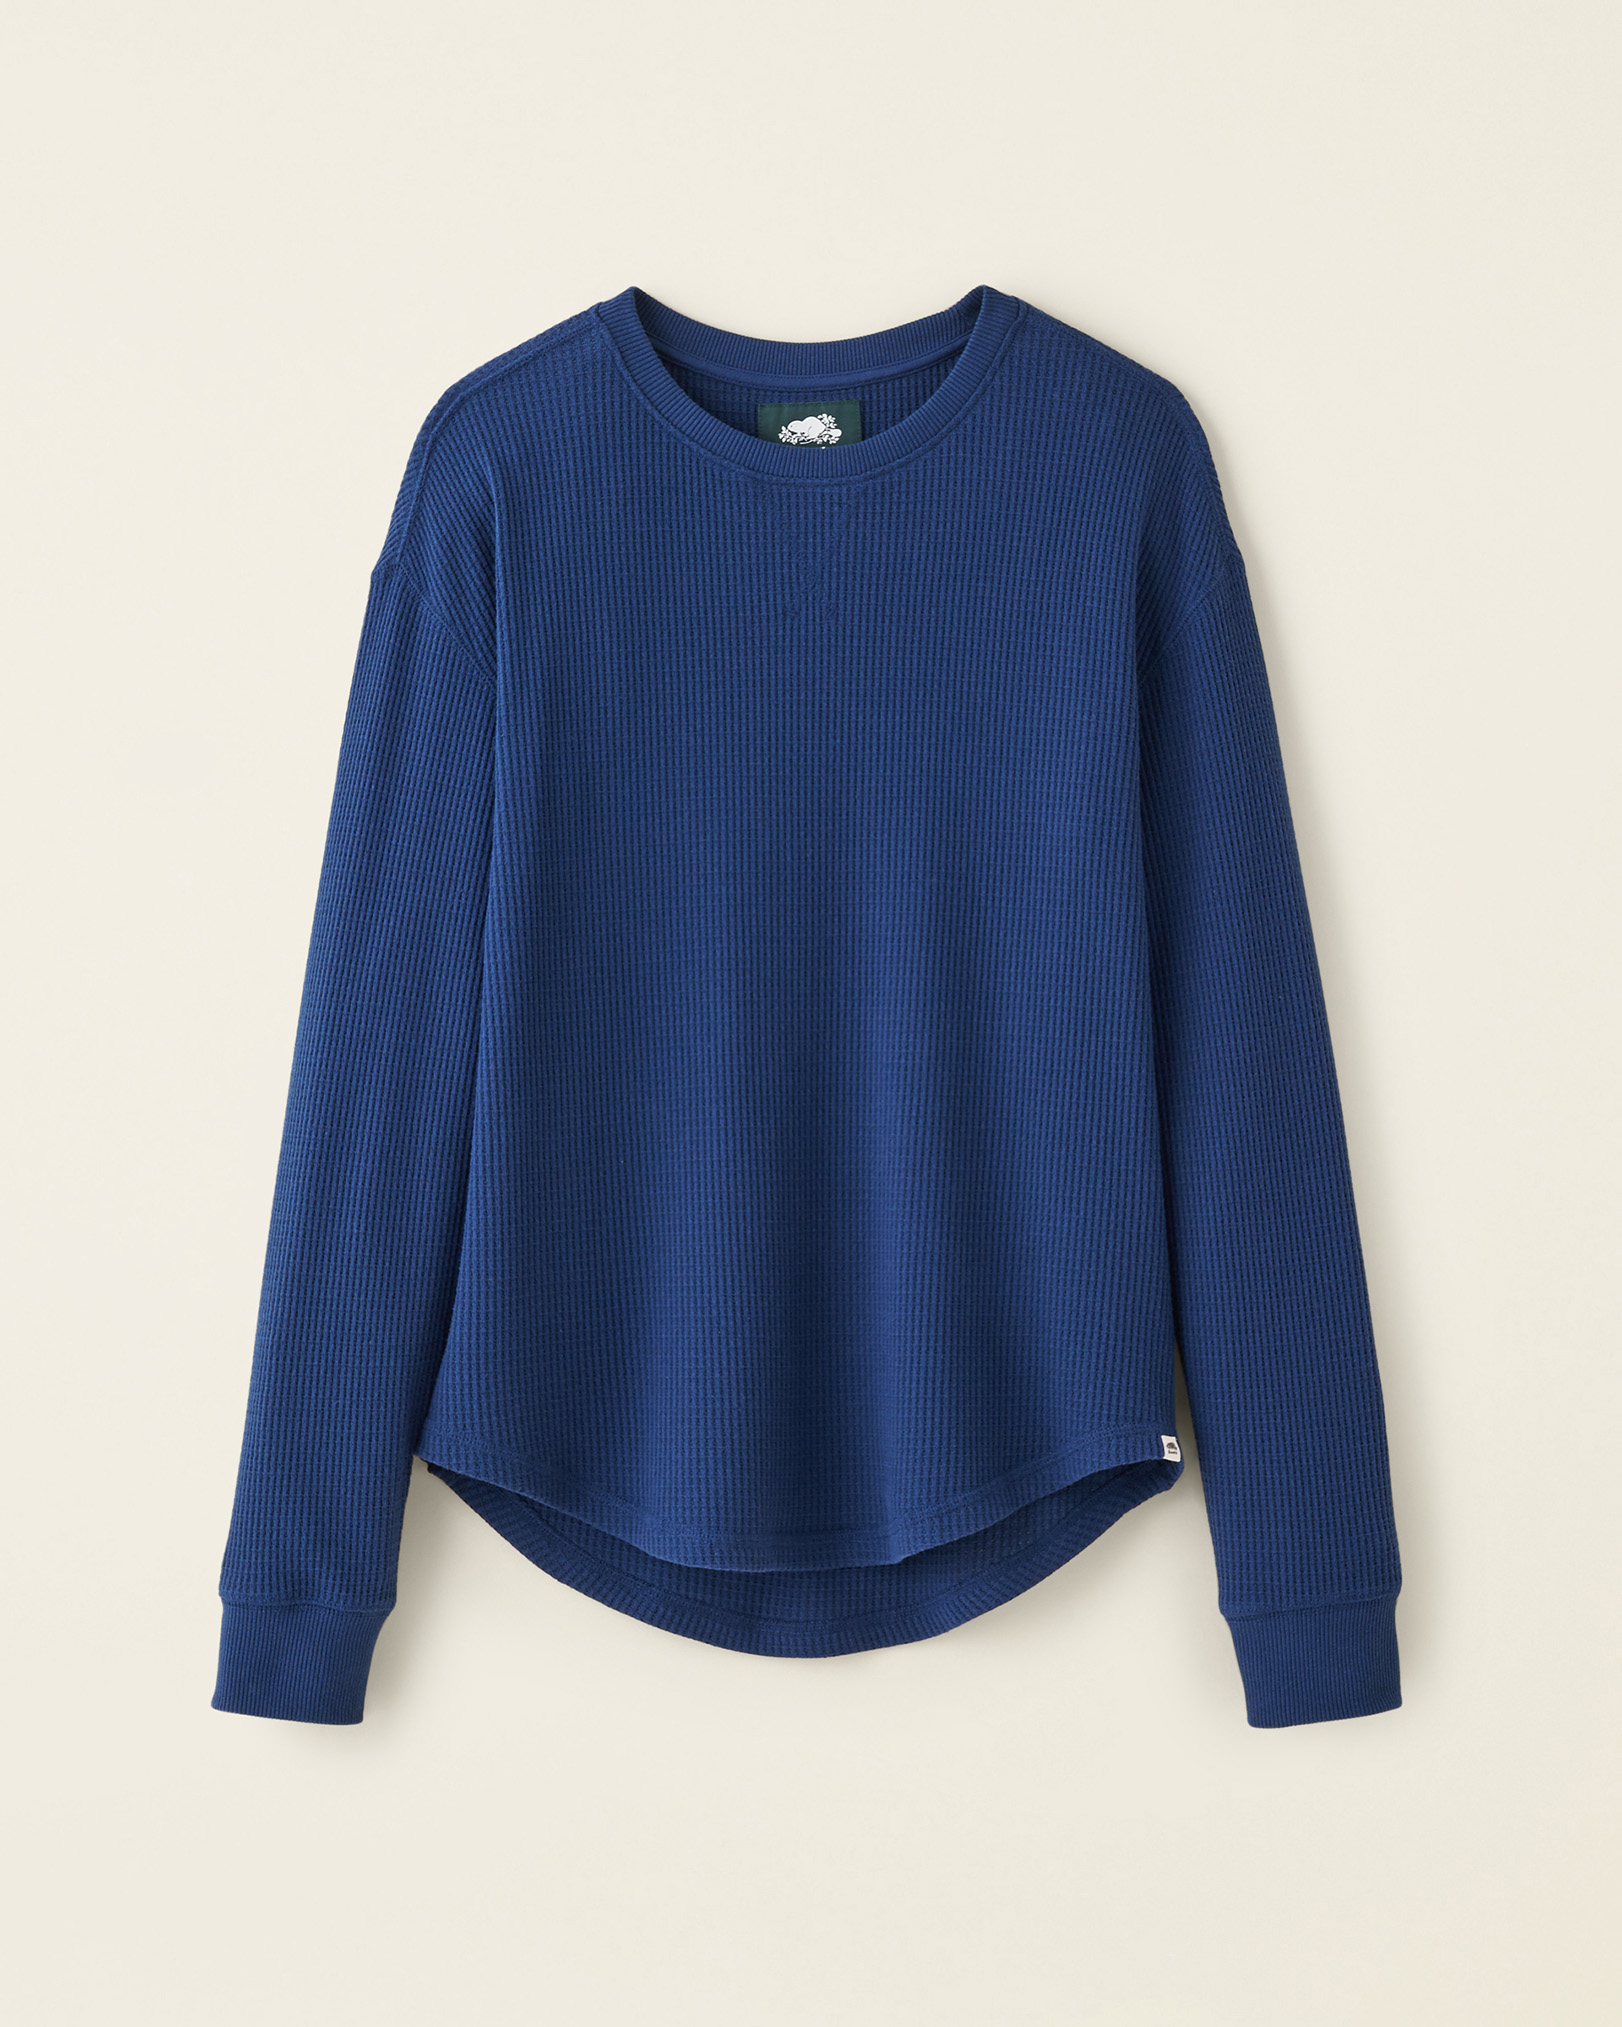 Roots Waffle Long Sleeve Top in True Navy